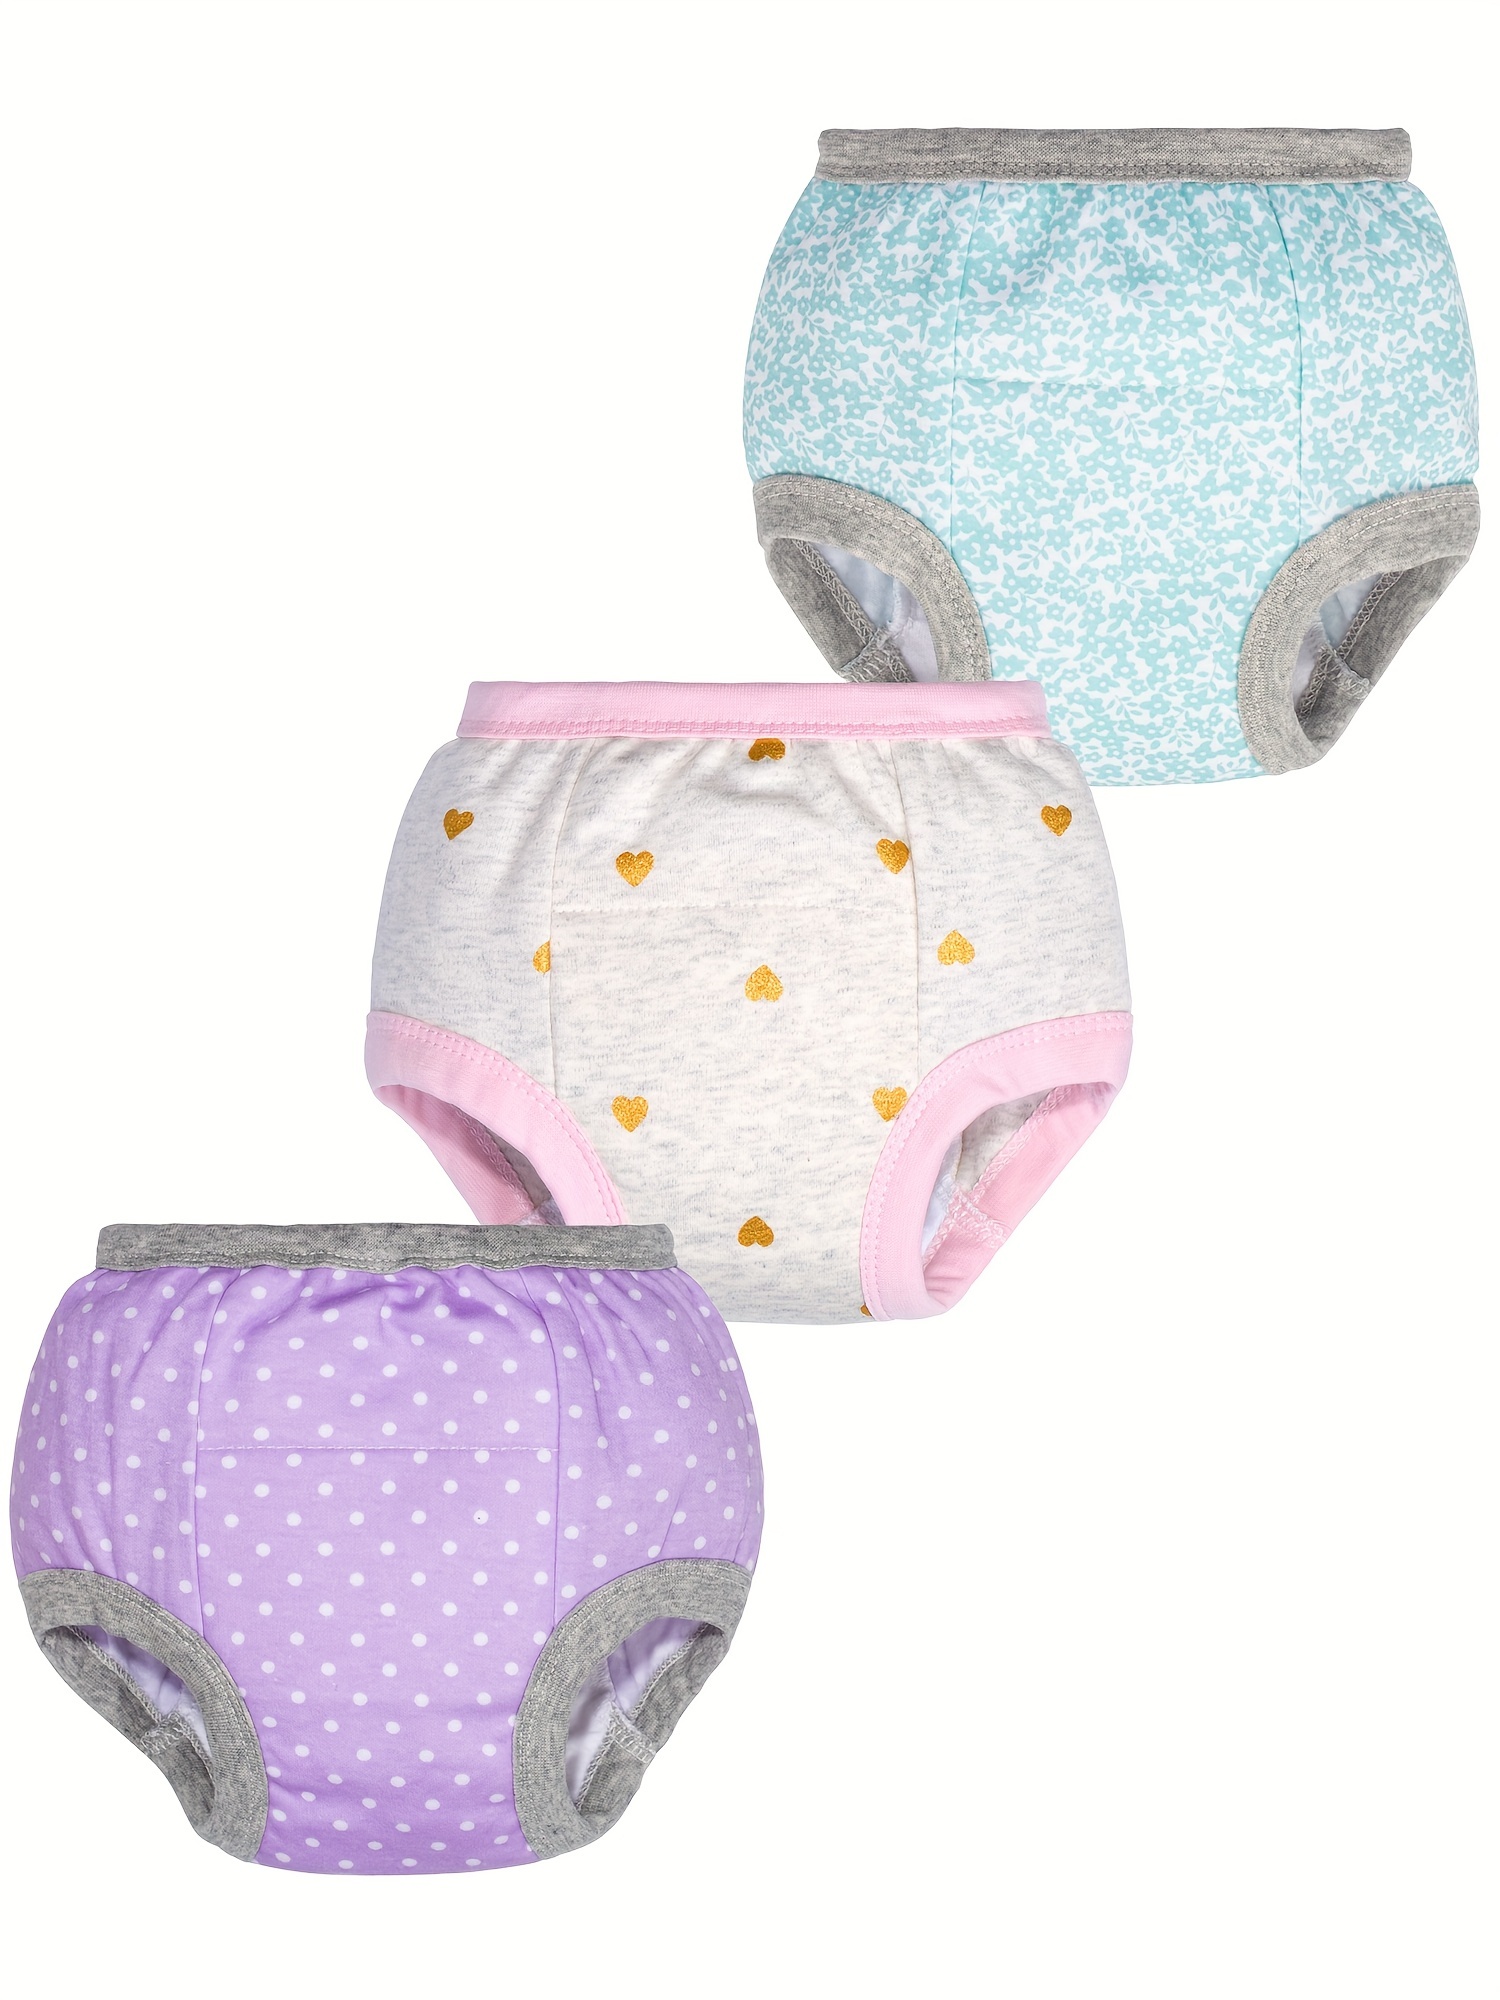 3pcs Washable Breathable 6-layer Cloth Diaper Pants For Baby - Training  Pants With Urine Pocket For Children Aged 1-5 To Learn Using The Toilet